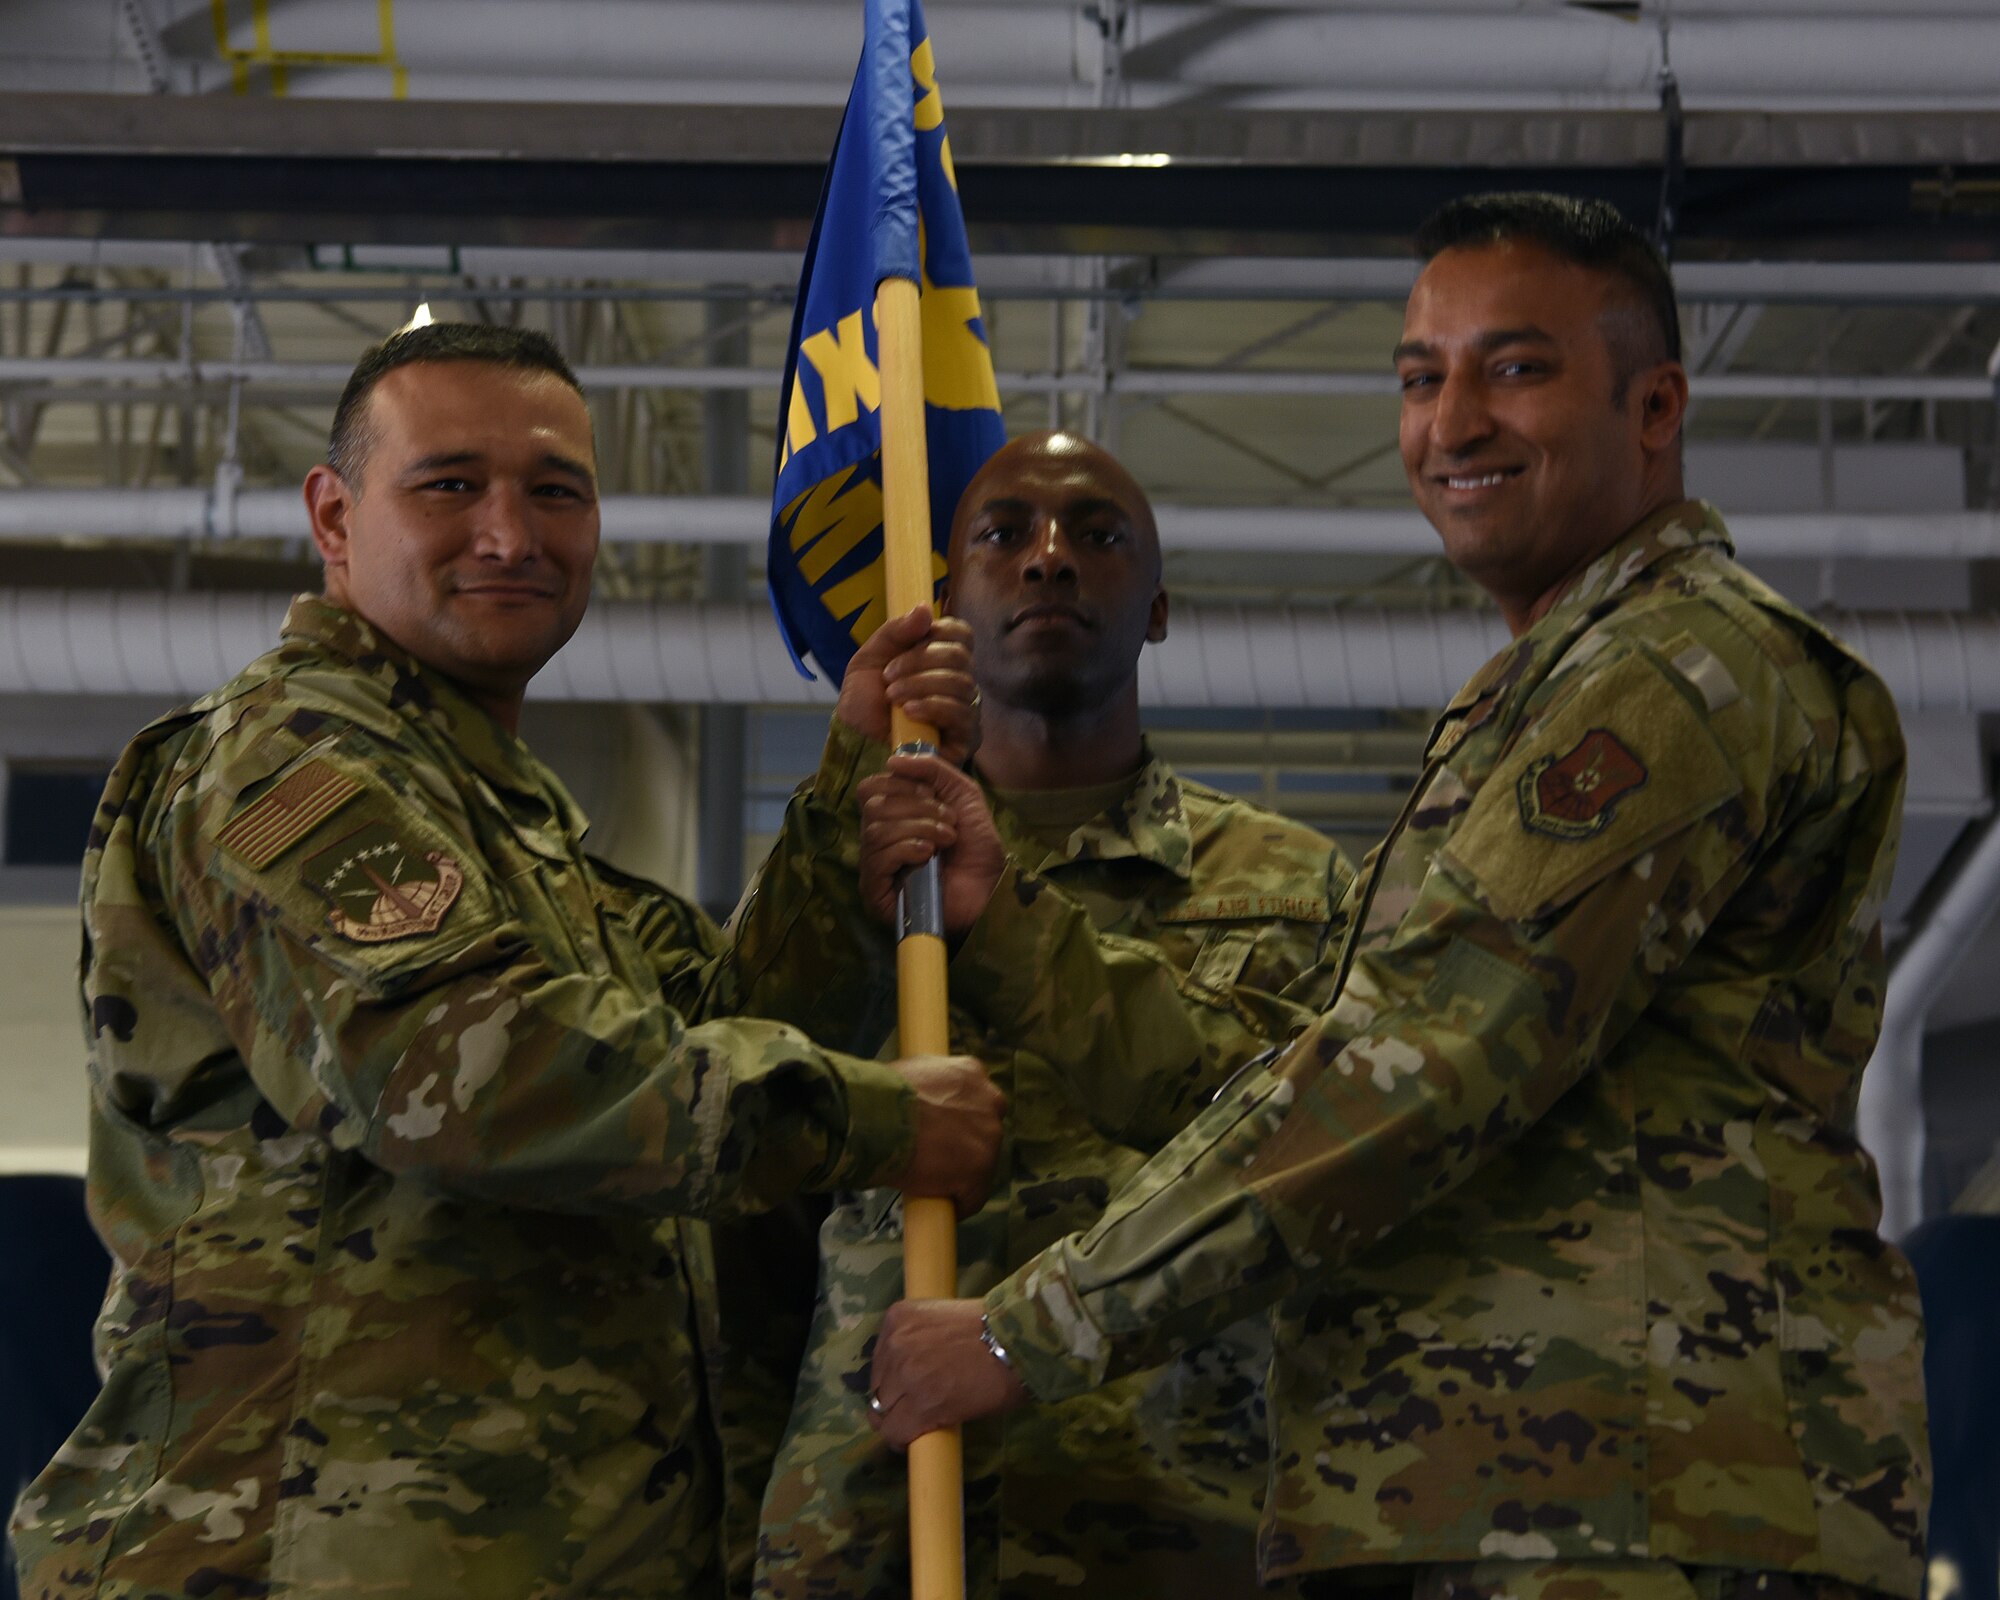 Colonel Brian Rico, 90th Maintenance Group commander, passes the guidon to Maj. Aaron Taylor, 790th Maintenance Squadron incoming commander, during the 790ths MXS change of command ceremony June 27, 2019, on F.E. Warren Air Force Base, Wyo. The ceremony signified the transition of command from Maj. Christine Hernandez to Taylor (U.S. Air Force photo by Senior Airman Nicole Reed)